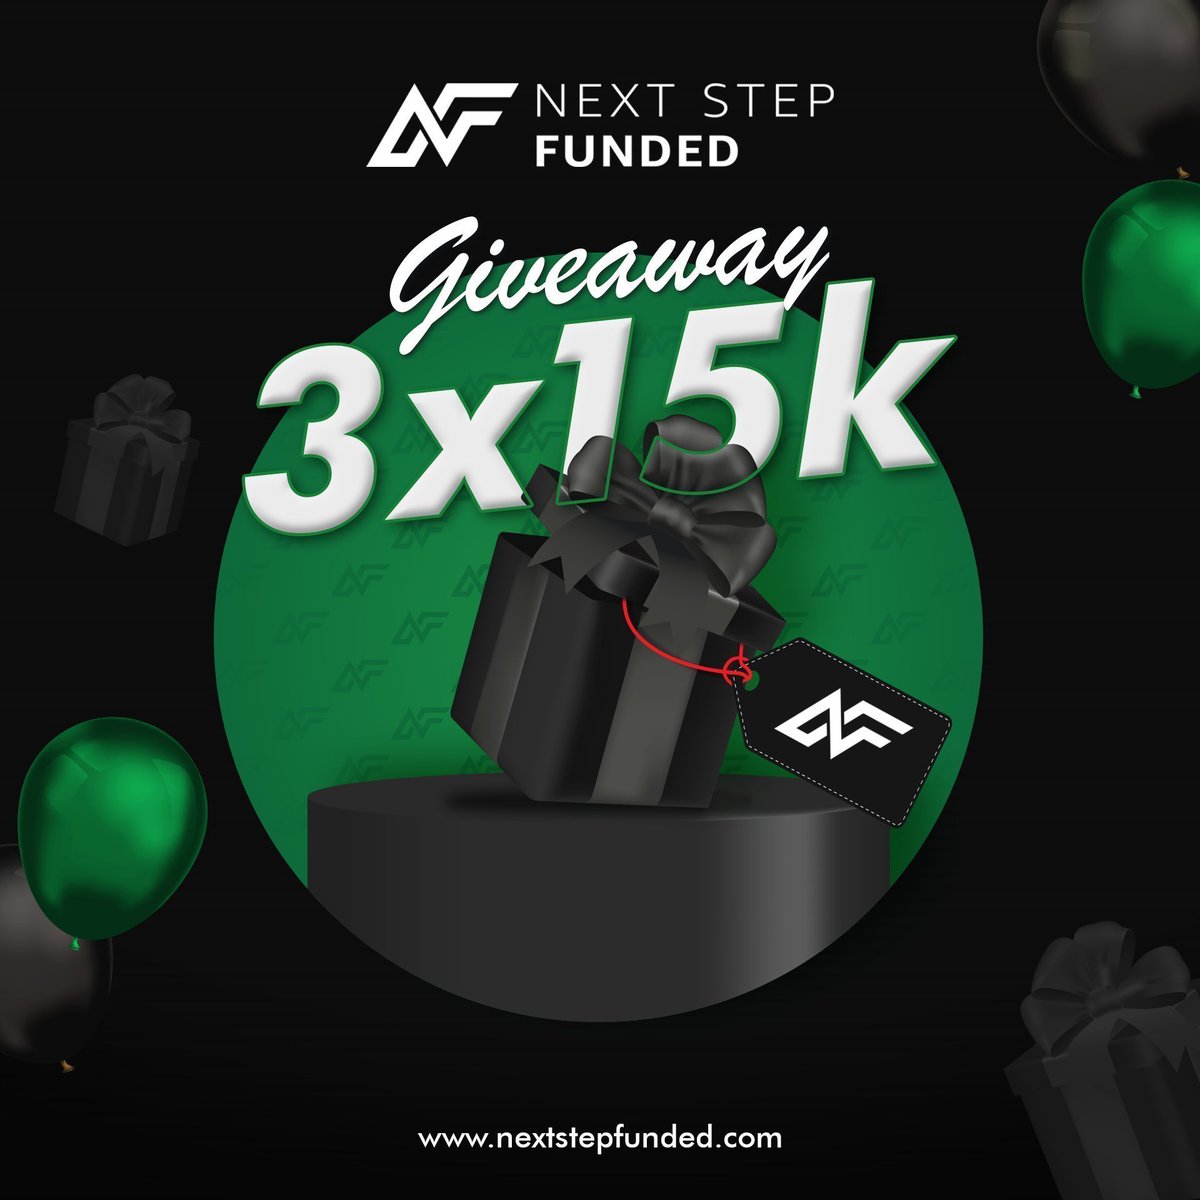 🚨NEXT STEP FUNDED Giveaway Alert 🚨 3 x 15K Account Rules : 🟢 Must Follow: @NextStepFunded @sherly_FX Also follow: @taptapFX2 @TraderZyrone @RazihelFX @BarnKapital @RicotheTrader_ @TraderKaizen0 🟢 Like + Repost 🟢 Tag 3 traders 🟢 Name one thing you're buying on your…